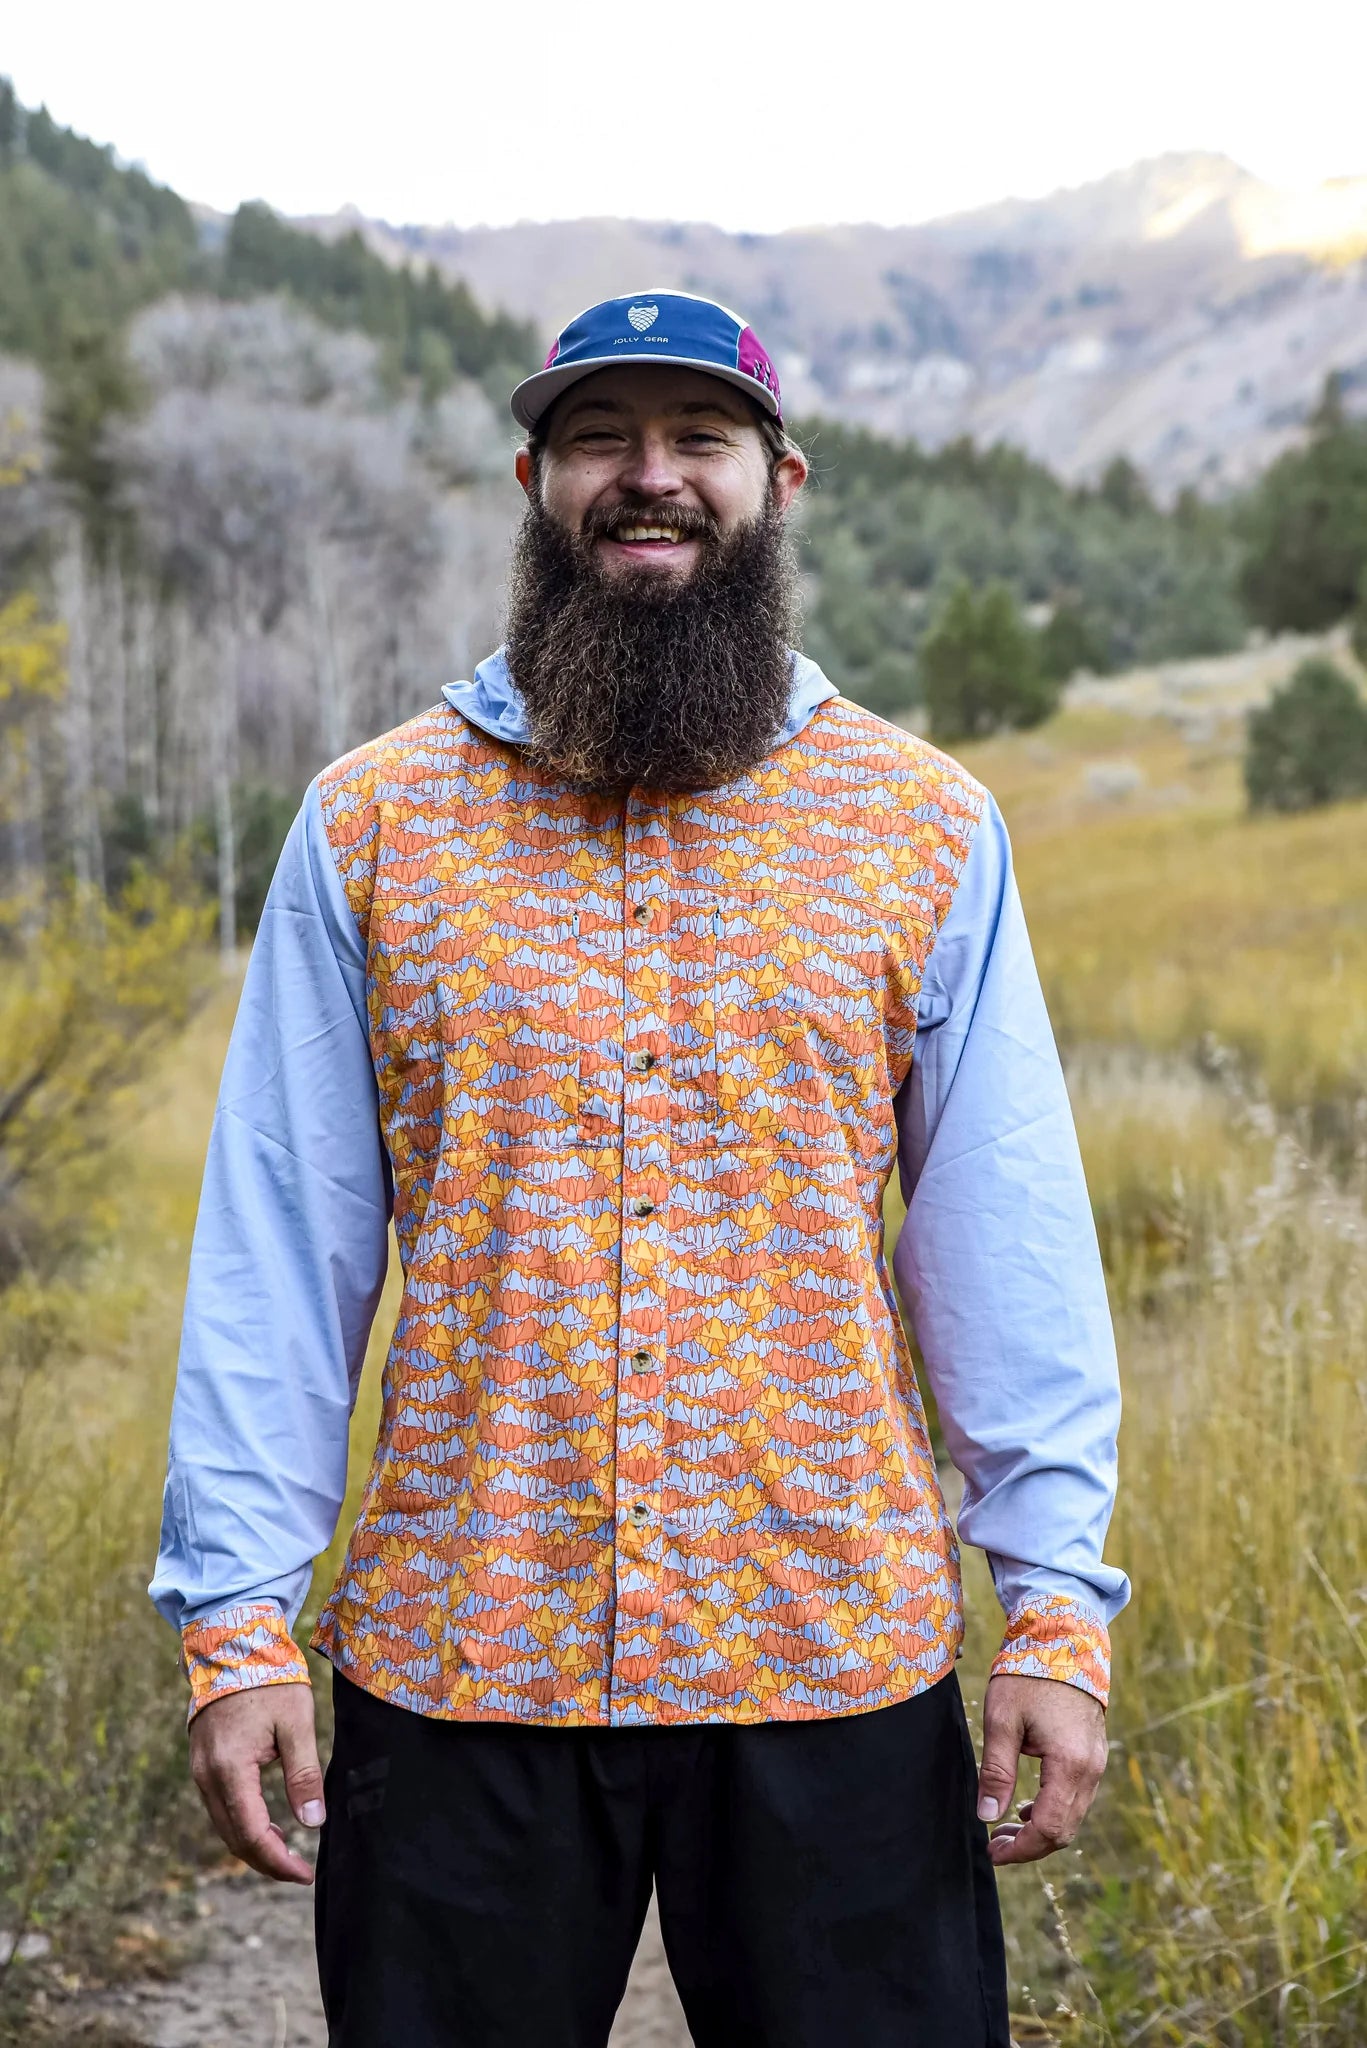 Patagonia Camping Button-Front Shirts for Men